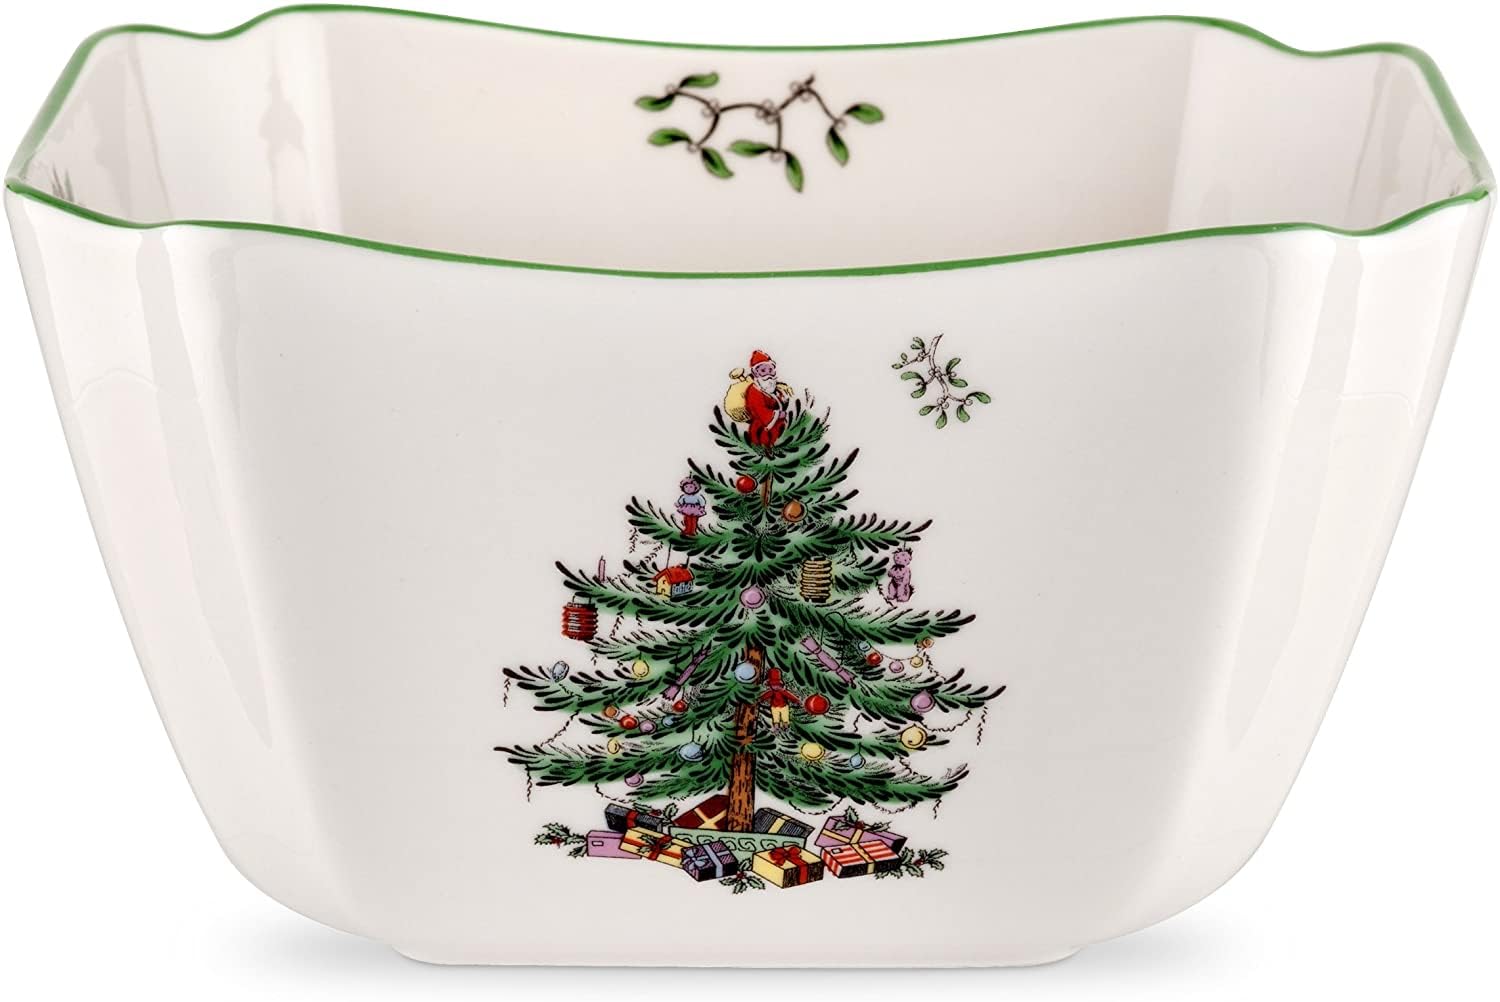 Spode Christmas Tree Square Bowl | 10 Inch Serving Bowl for Appetizers, Salad, and Pasta | Made from Fine Porcelain | Microwave and Dishwasher Safe